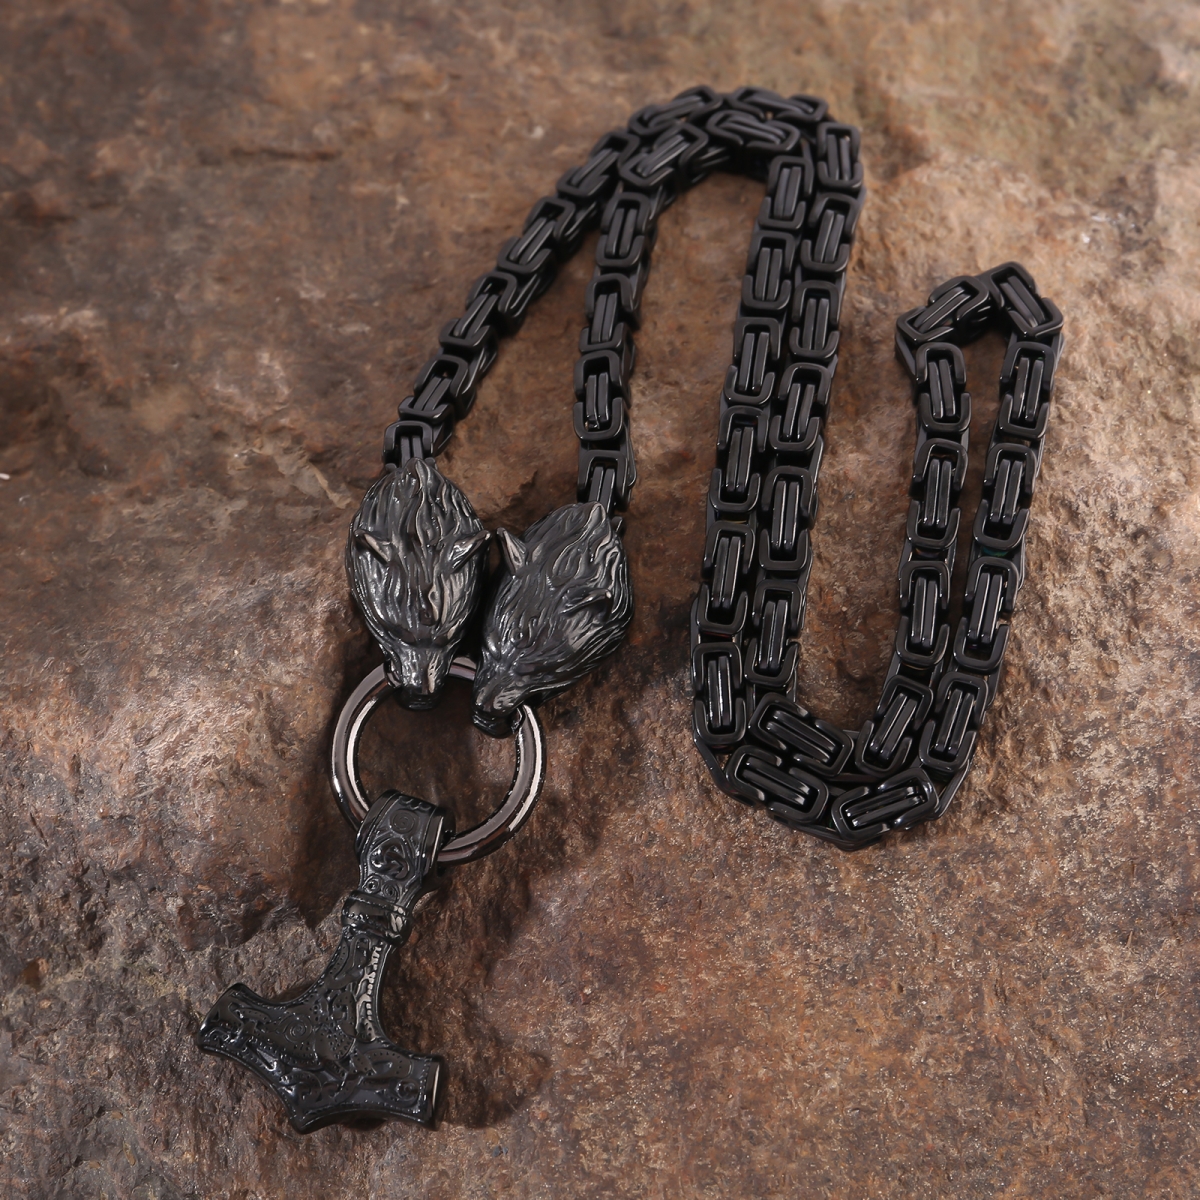 viking necklace odin wolf-NORSECOLLECTION- Viking Jewelry,Viking Necklace,Viking Bracelet,Viking Rings,Viking Mugs,Viking Accessories,Viking Crafts